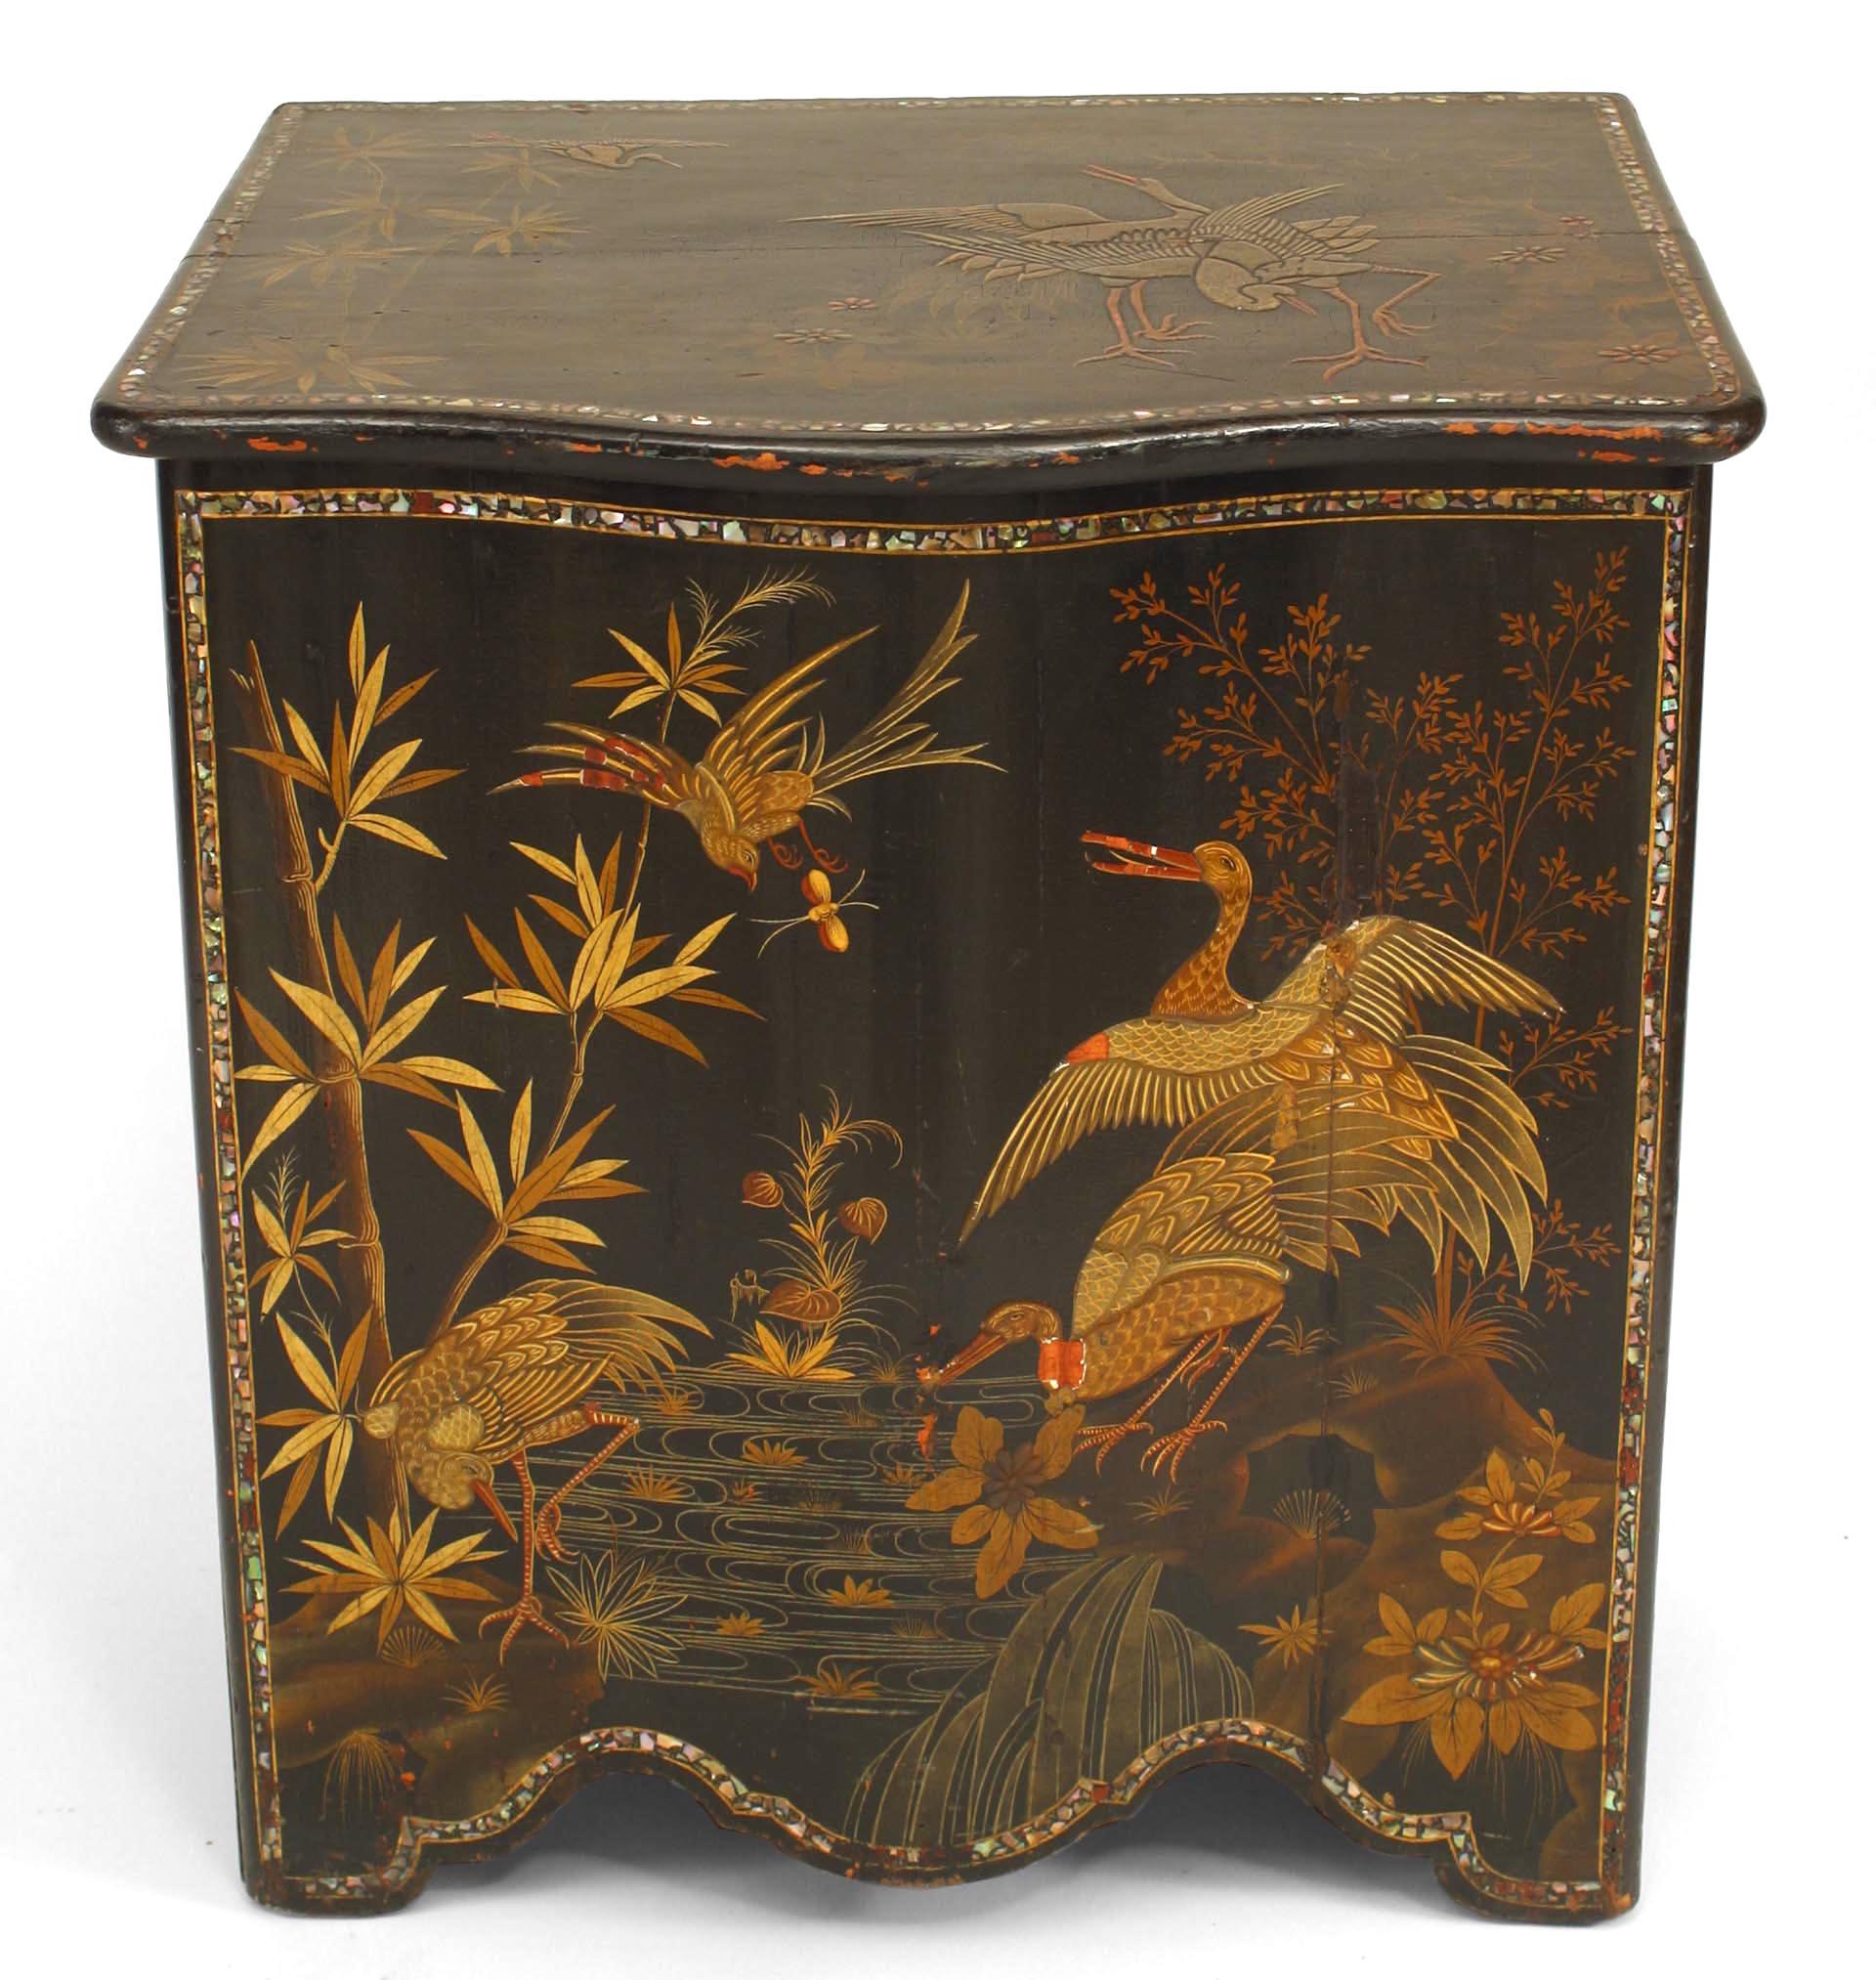 English Regency style (19th Cent) Chinoiserie lacquered and decorated slant top floor trunk (hamper) with pearl inlaid trim.
